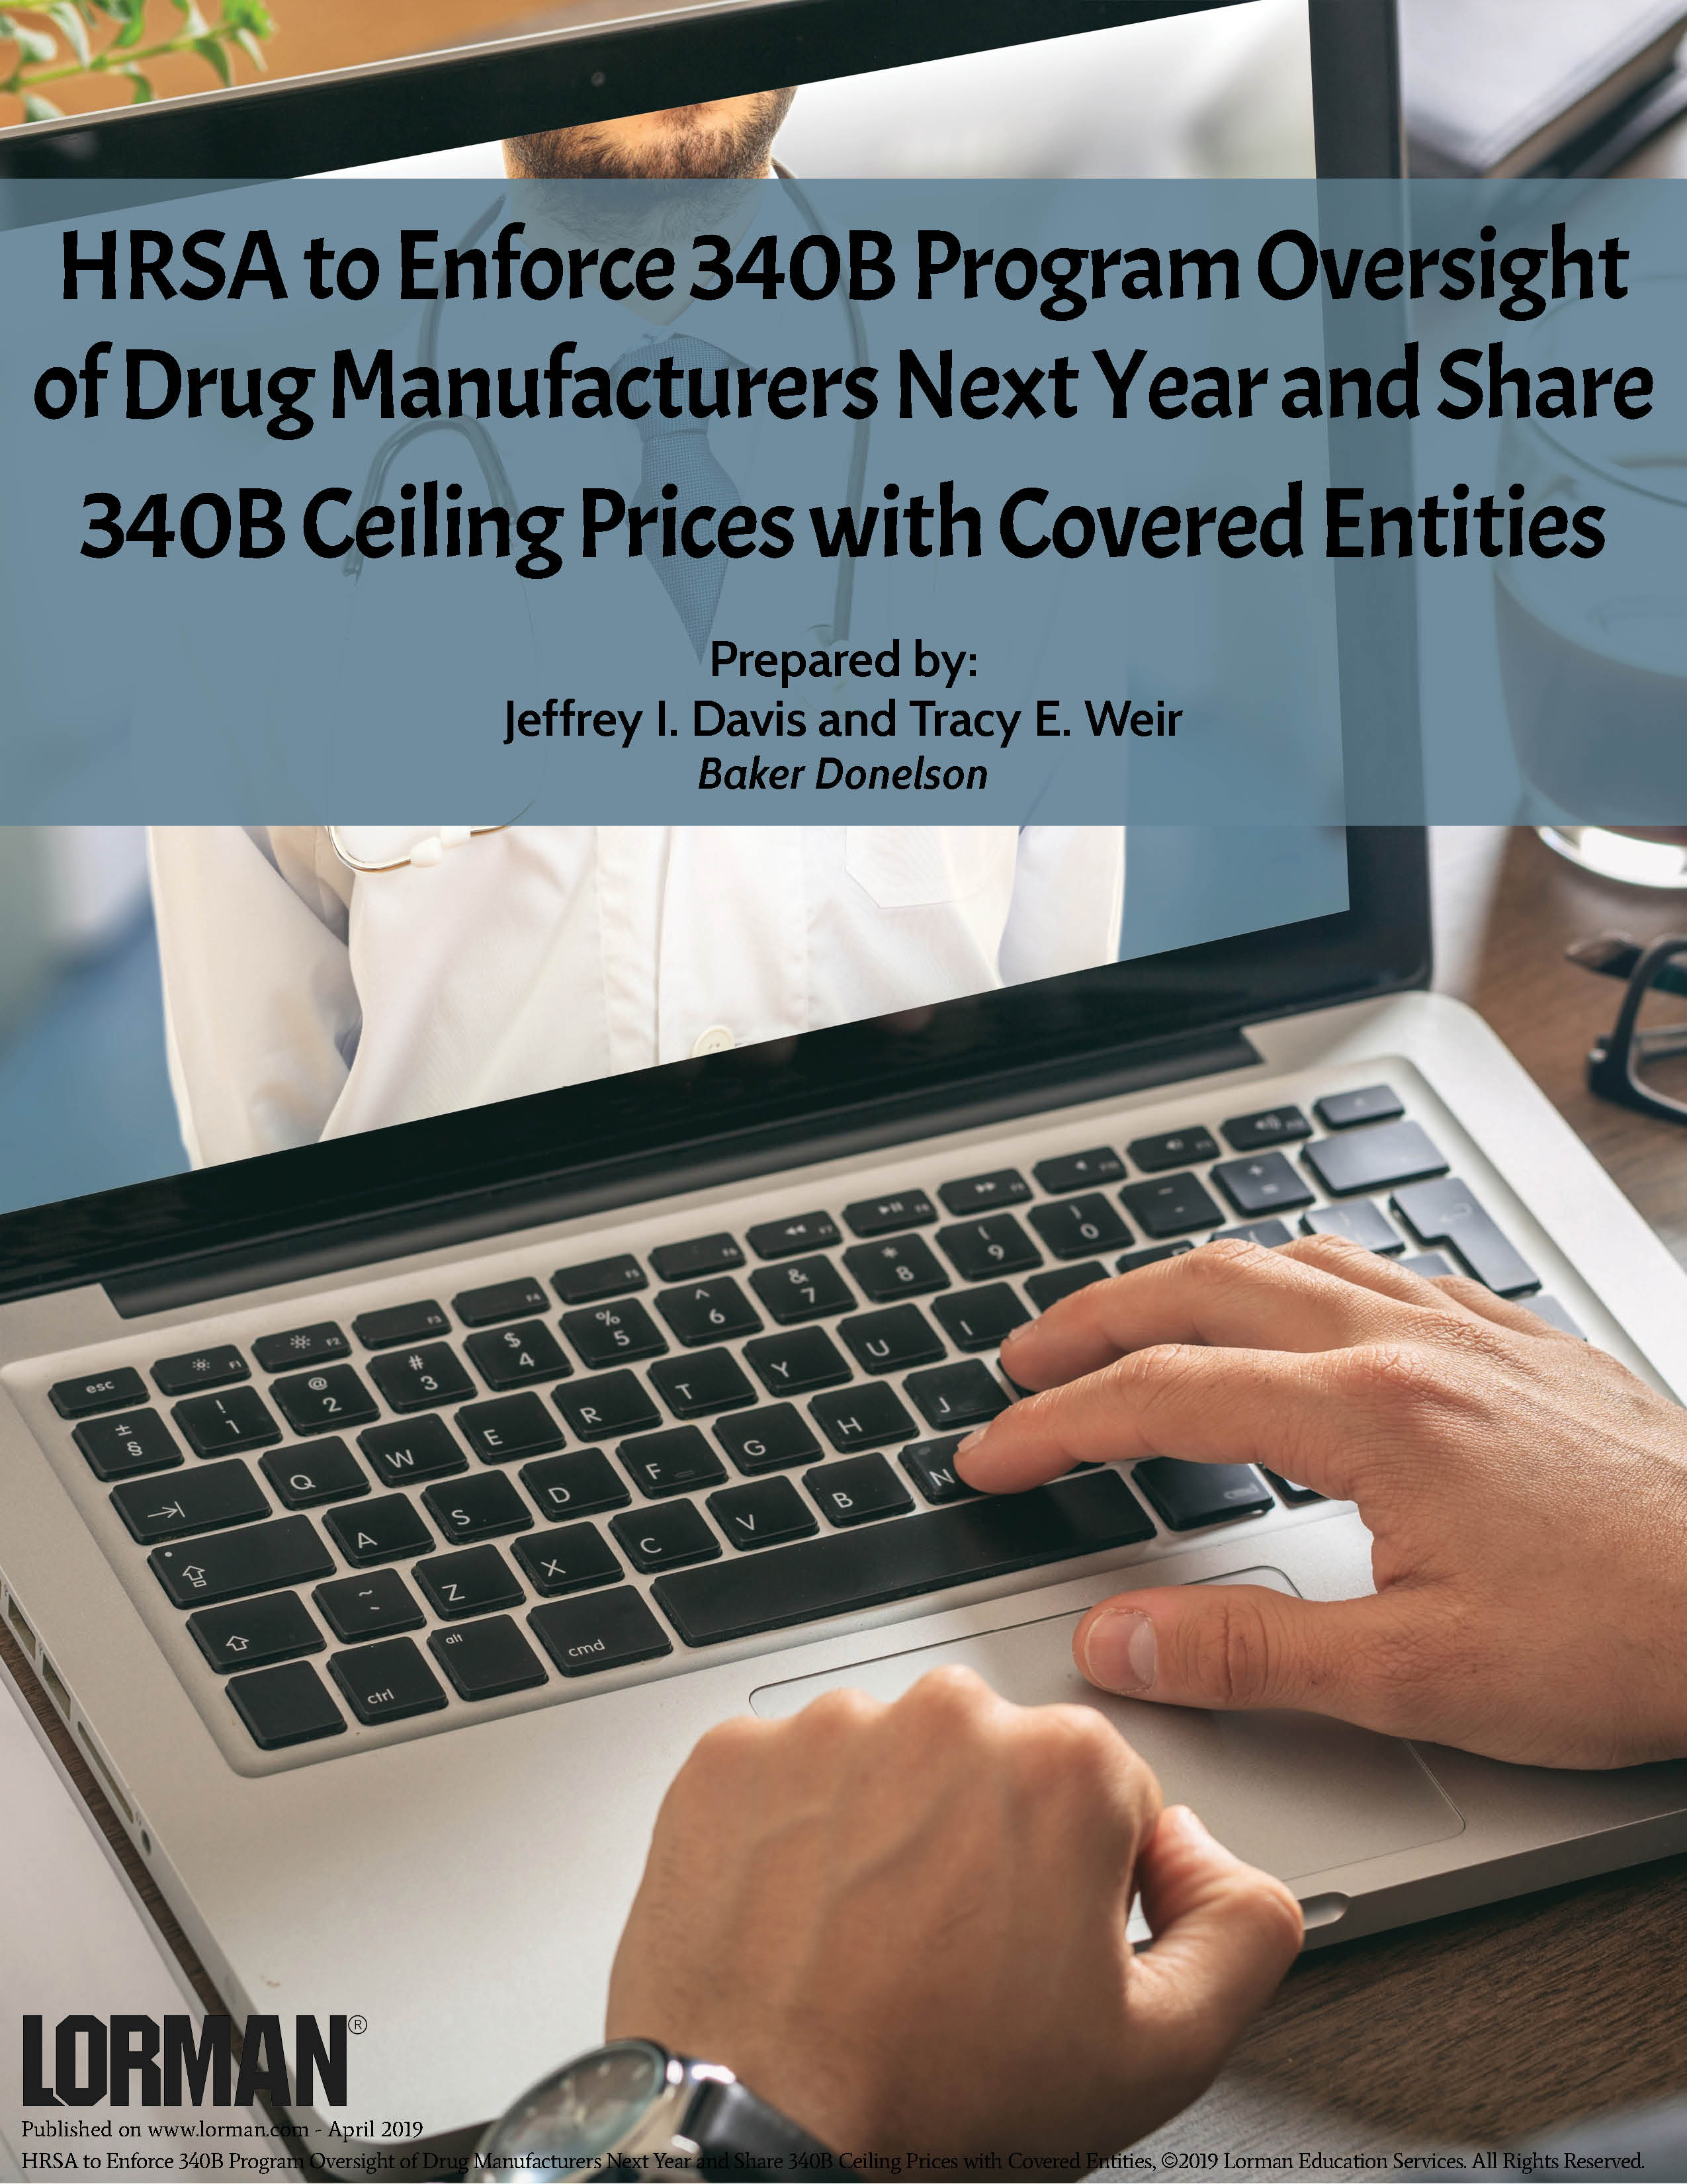 HRSA to Enforce 340B Program Oversight of Drug Manufacturers Next Year and Share 340B Ceiling Prices with Covered Entities